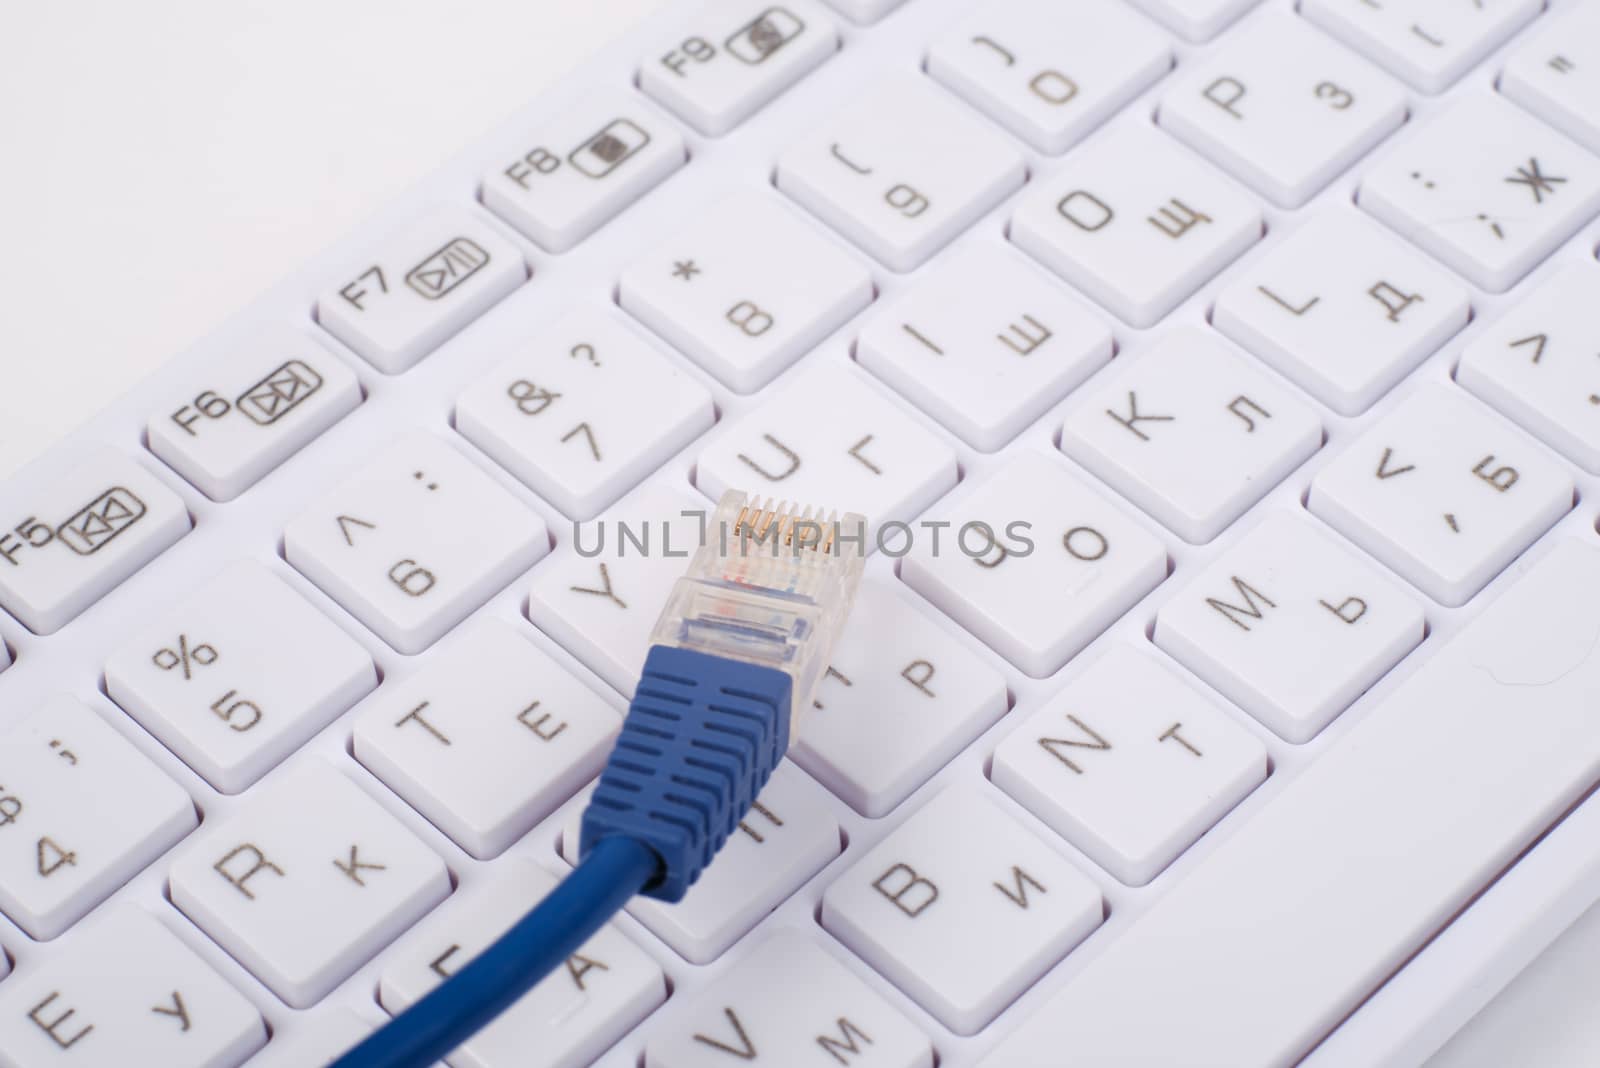 Computer keyboard with cable by cherezoff